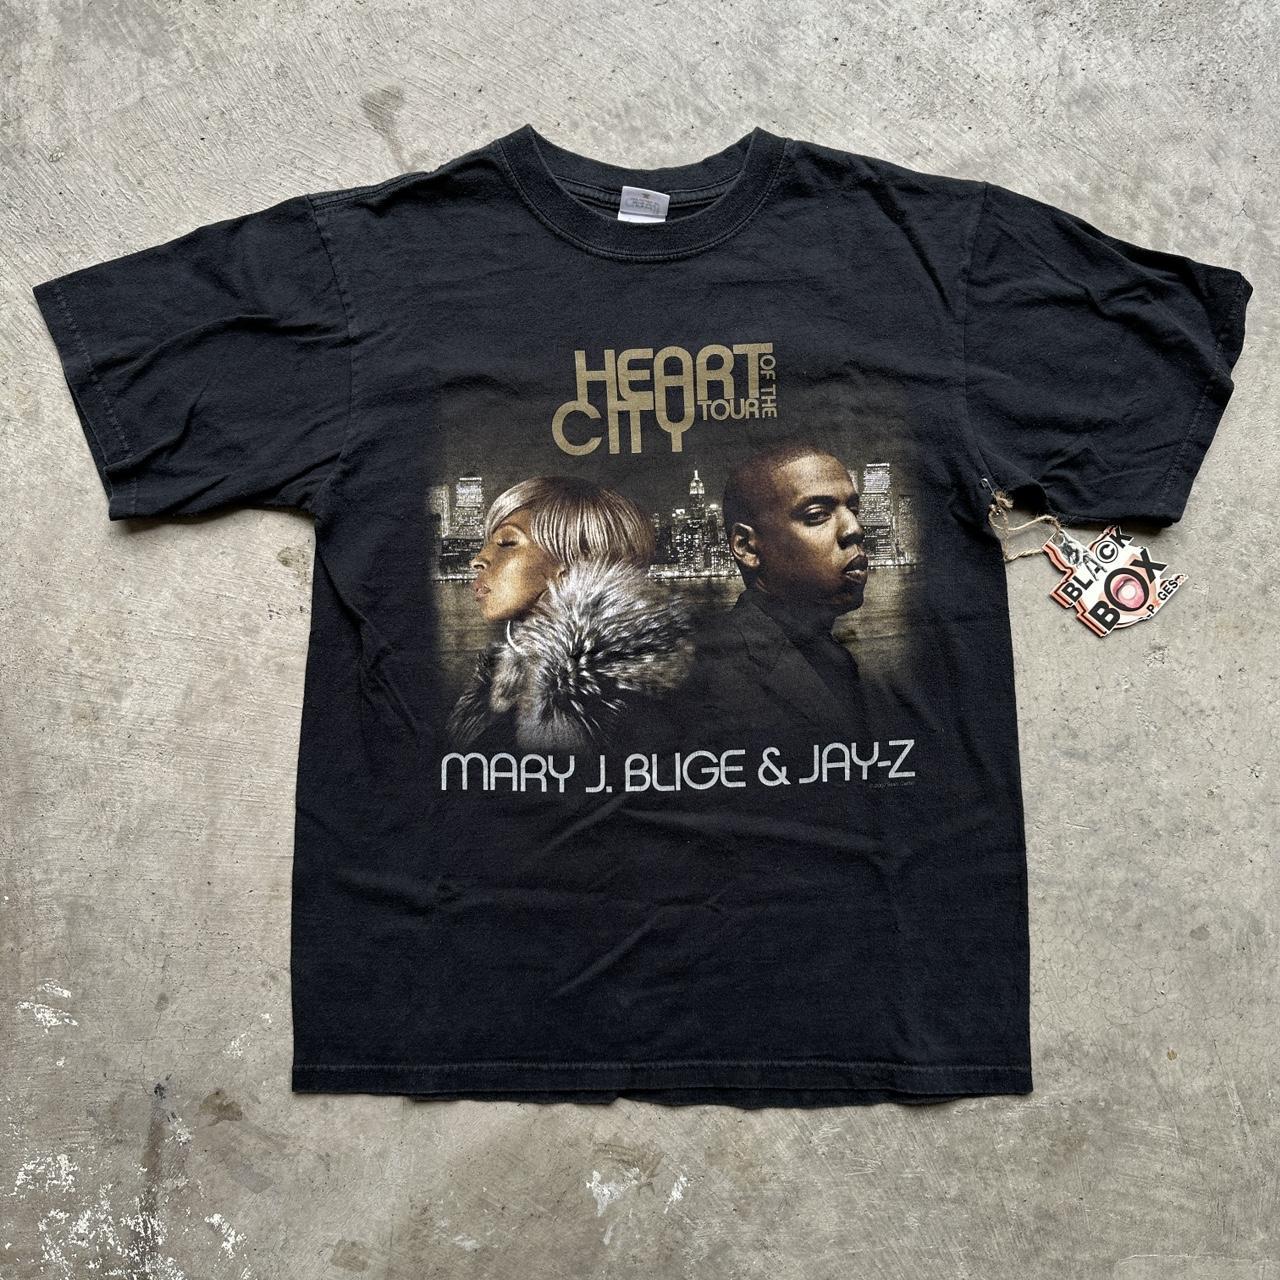 Jay-Z and Mary J. Blige 'Heart of the City' Tour T... - Depop